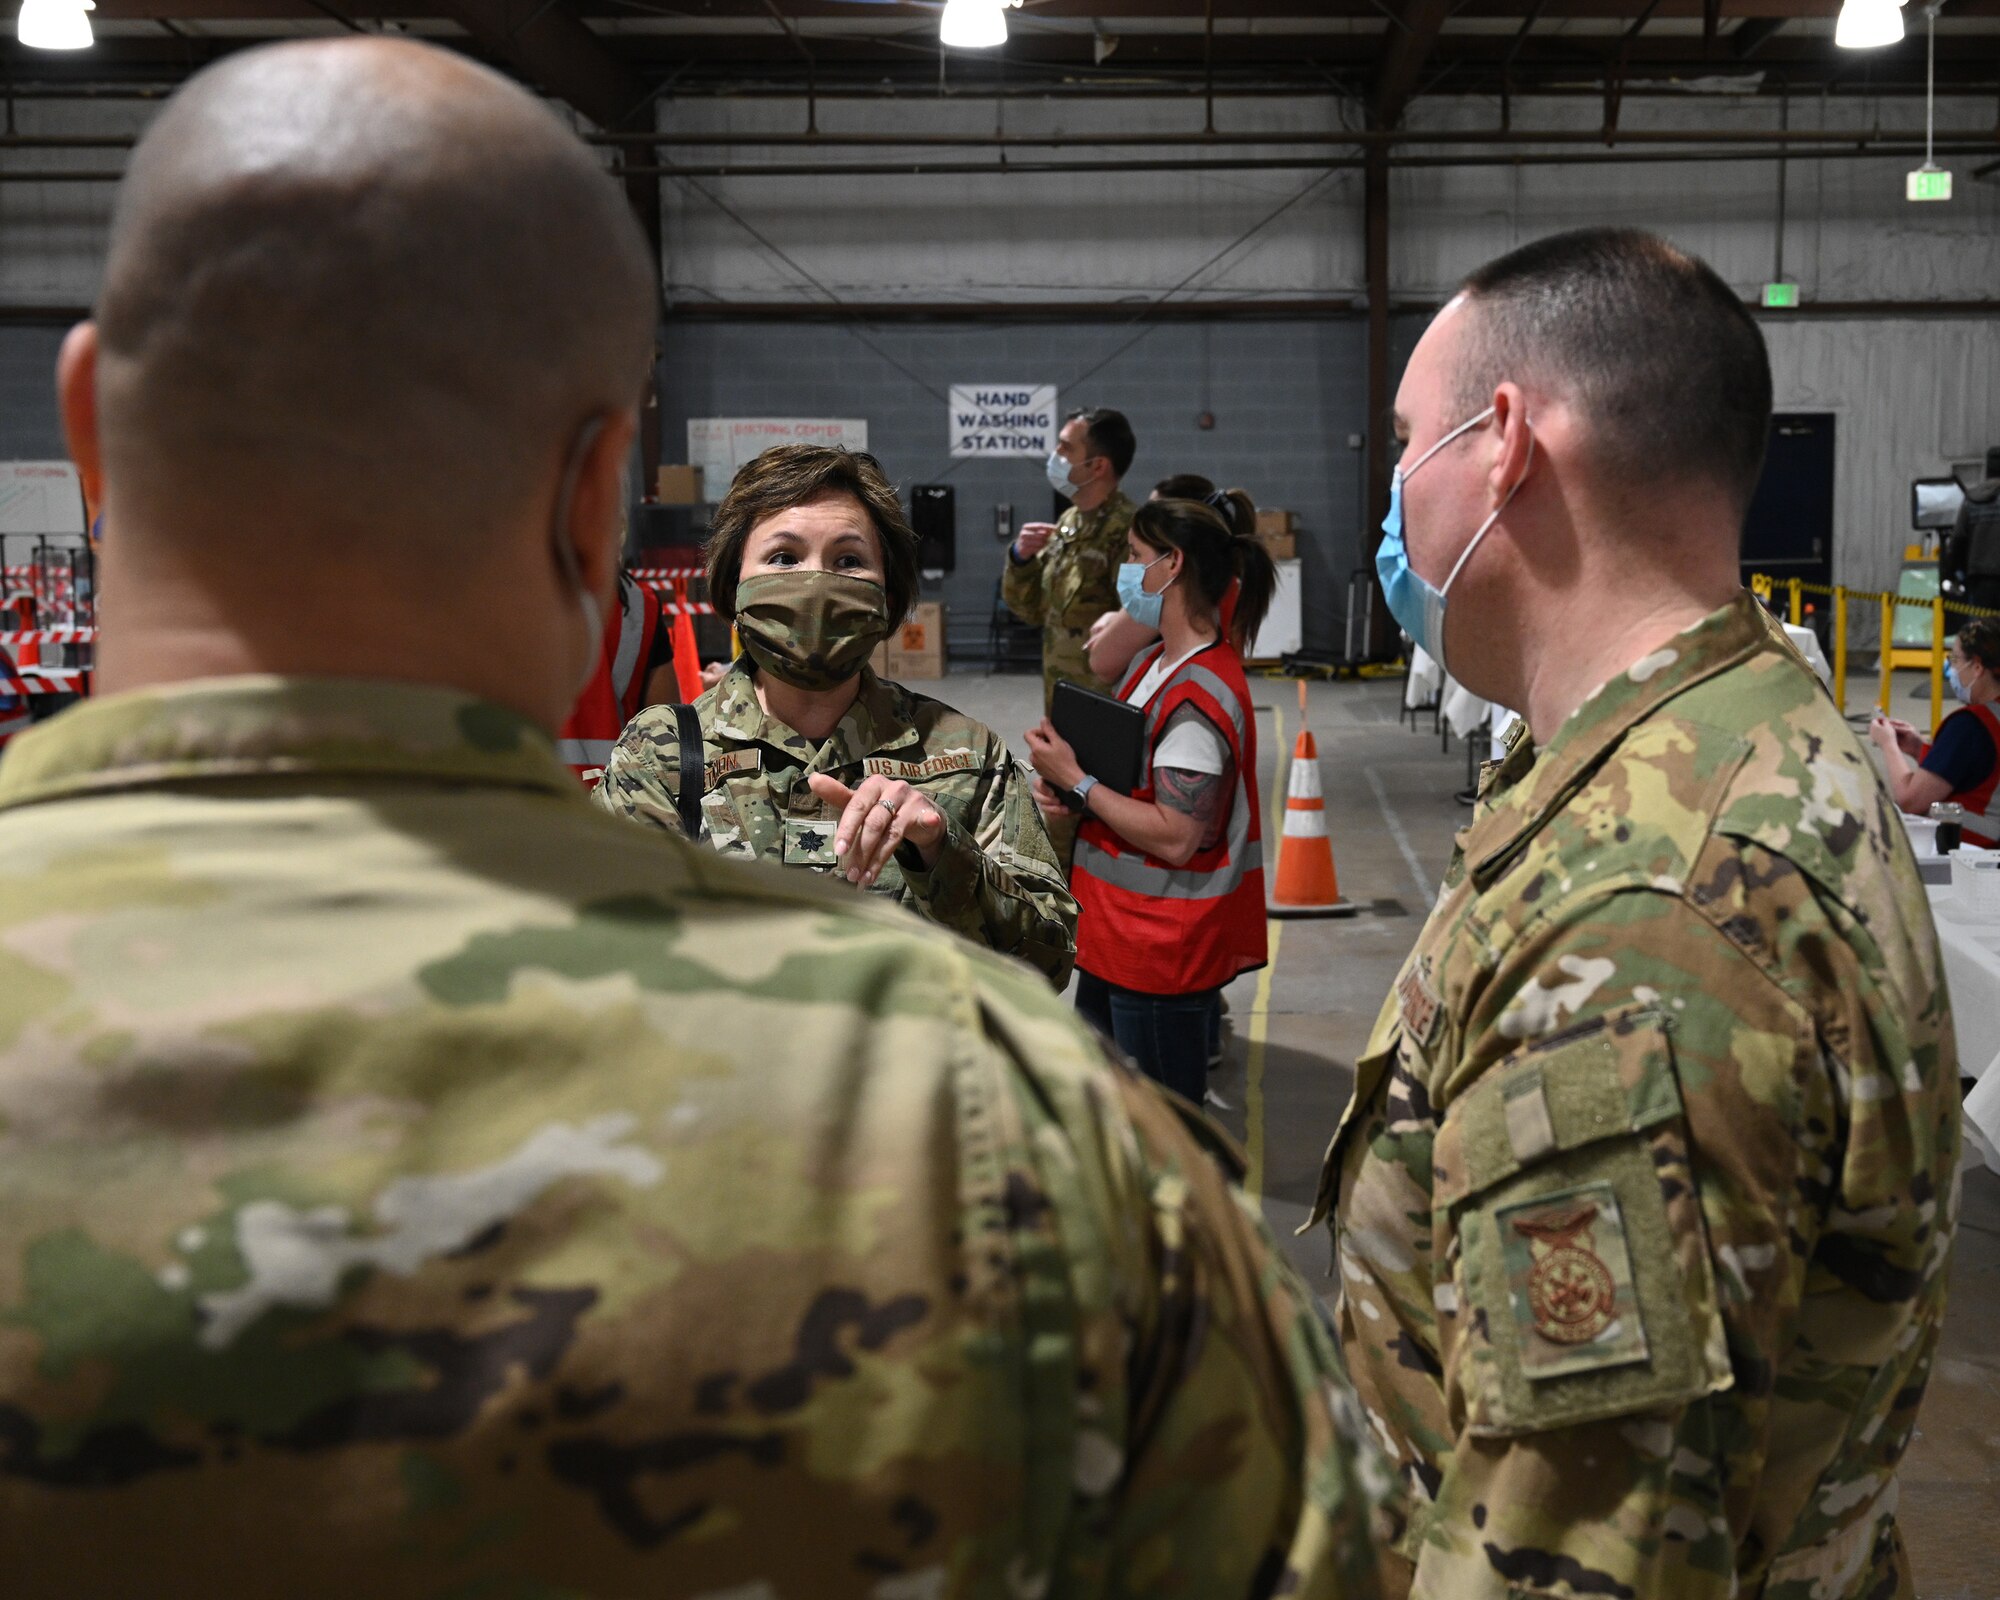 U.S. Air Force Lt. Col. Christine Estacion (middle), health services administrator assigned to the 175th Medical Group, speaks with U.S. Air Force Tech. Sgt. William Blakely (right) and U.S. Air Force Master Sgt. Jason Shanley, firefighters assigned to the 175th Civil Engineer Squadron, at the COVID-19 mass vaccination site at the Maryland State Fairgrounds in Timonium, Md., April 15, 2021.